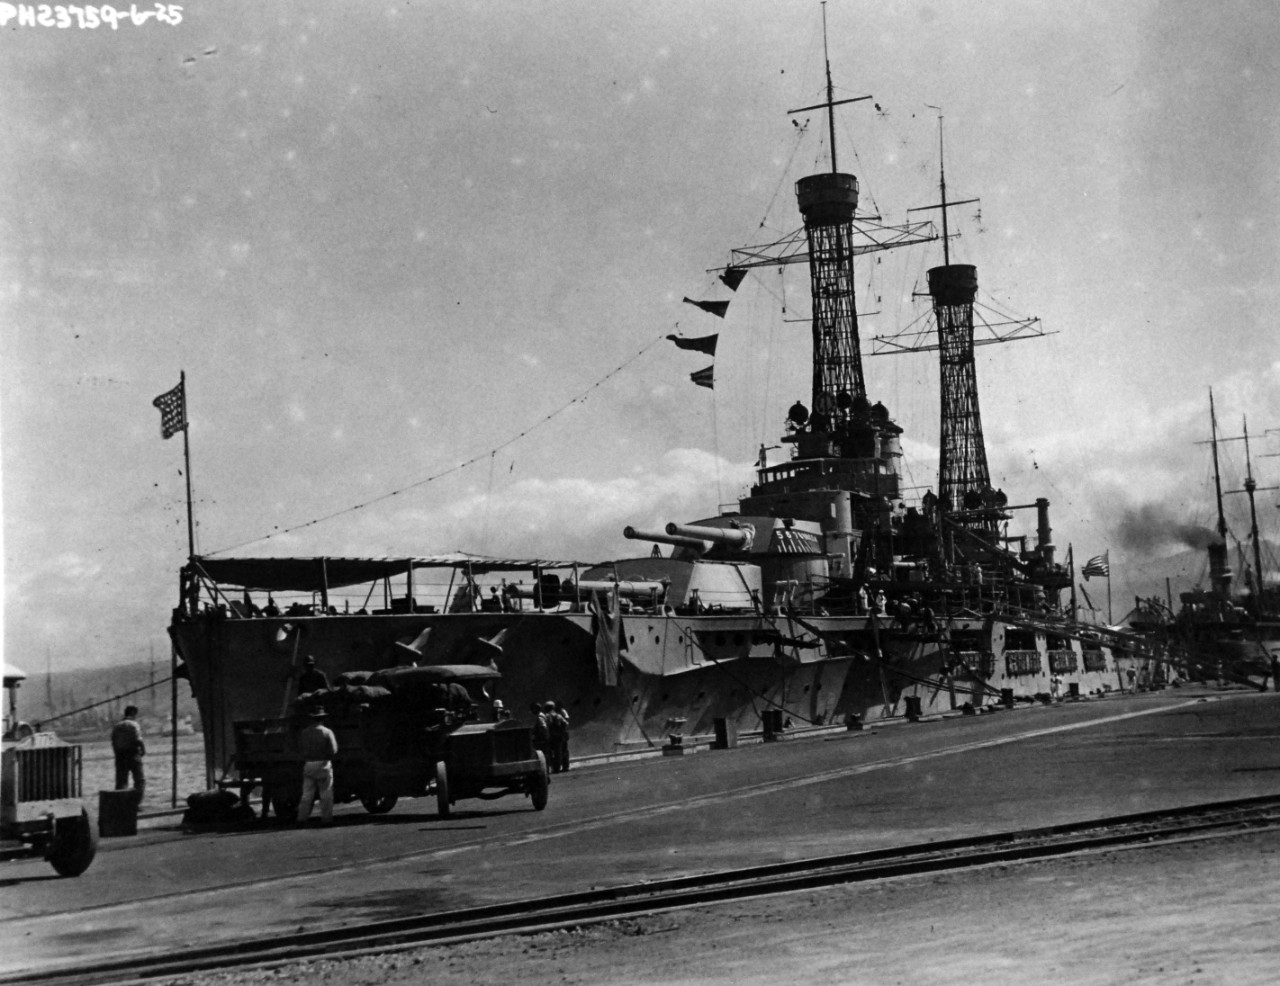 80-CF-14-2045-4:  USS Nevada (BB-36), June 1925.  Nevada alongside 10-10 dock, Pearl Harbor, Territory of Hawaii, June 6, 1925.  Official U.S. Navy Photograph, now in the collections of the National Archives. 